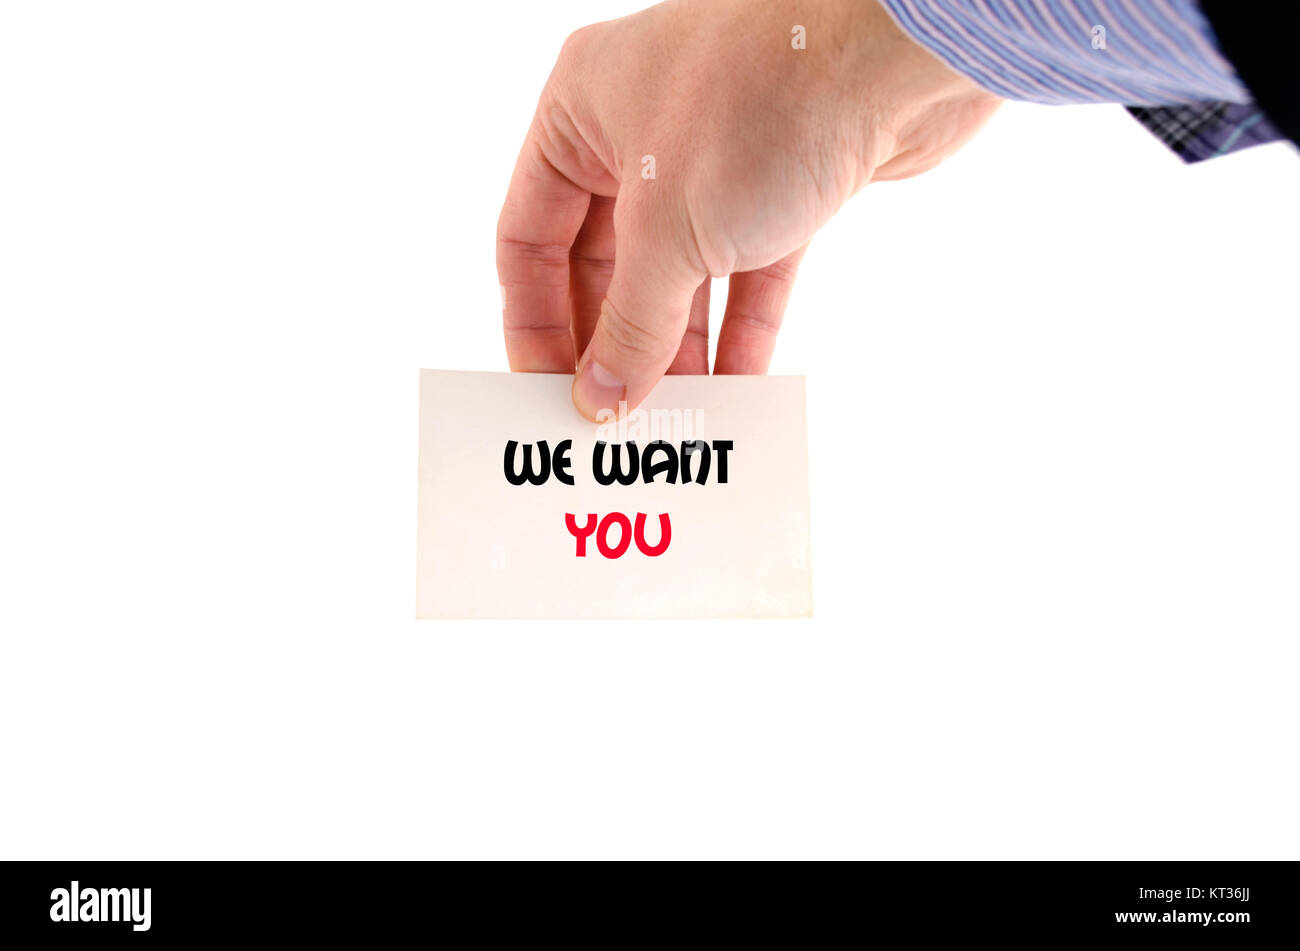 We want you text concept Stock Photo